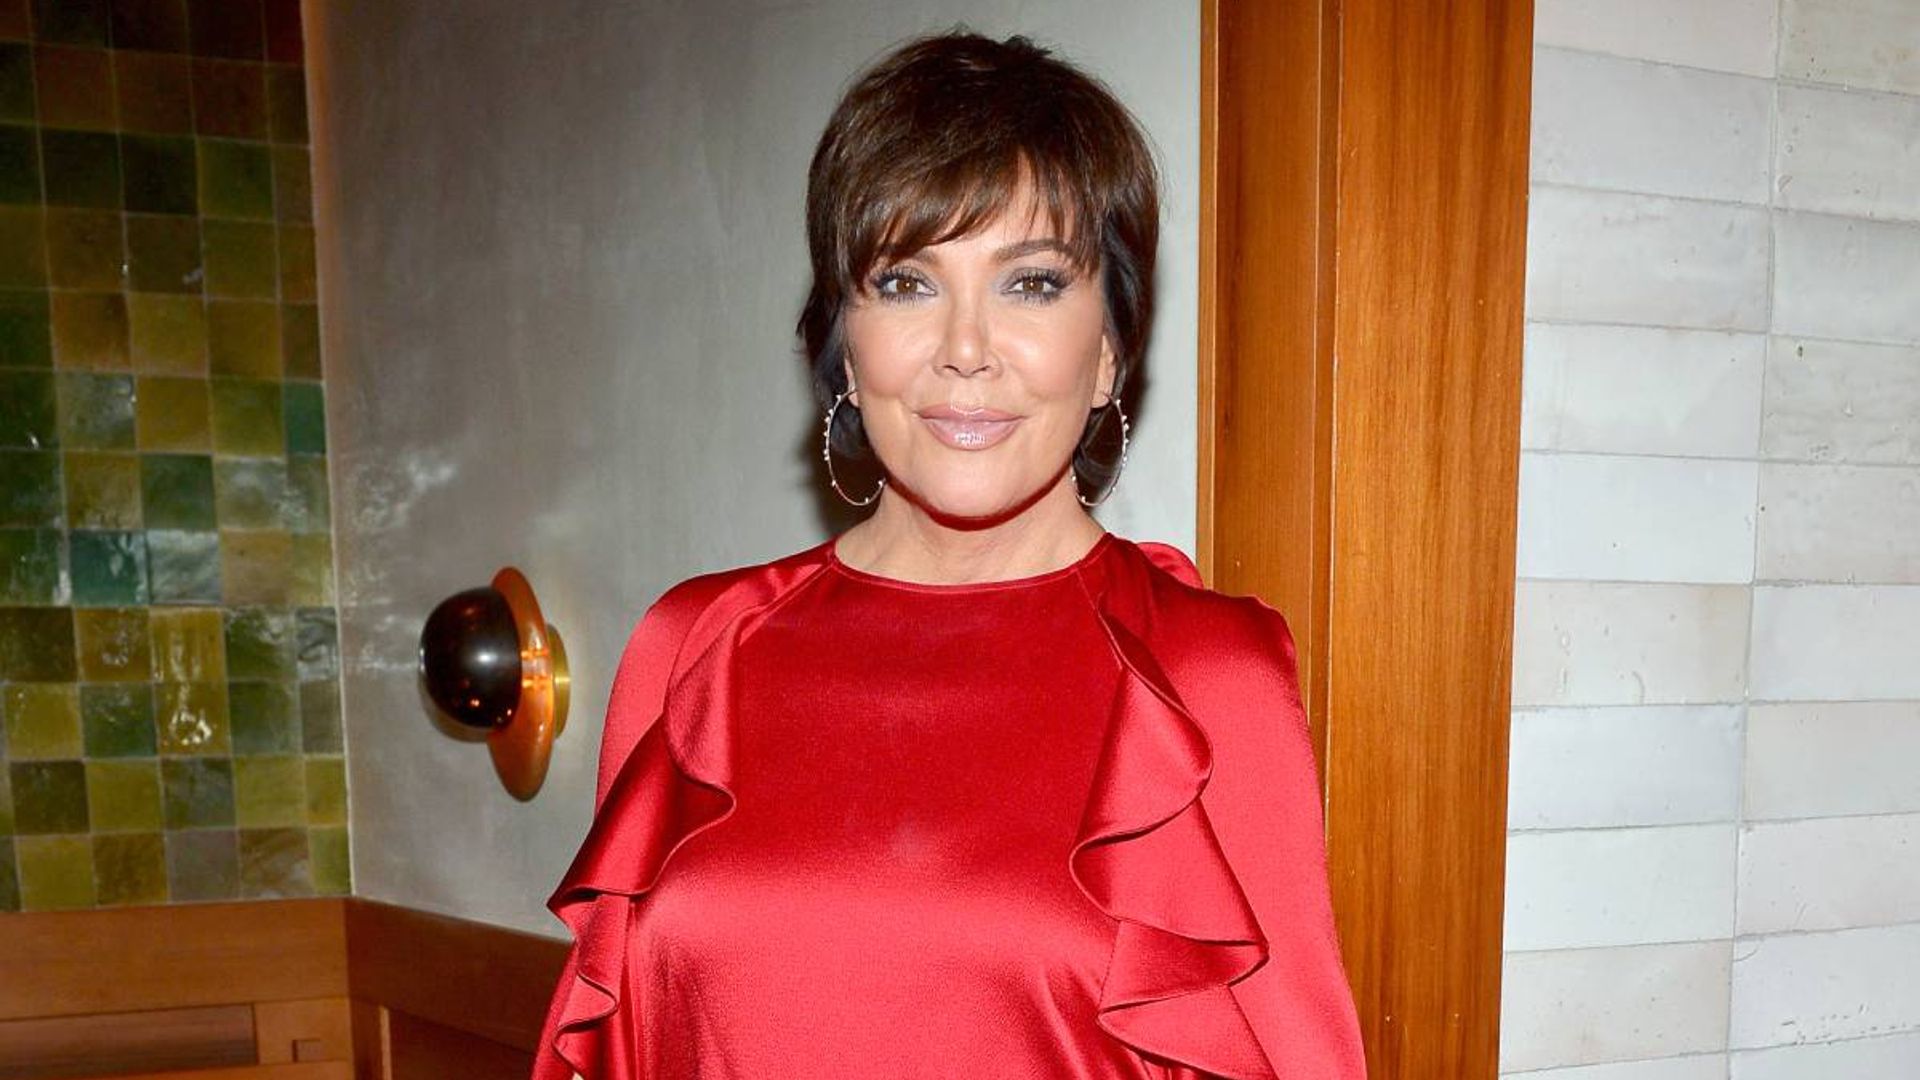 Kris Jenner's insane fridge is out of this world – photos